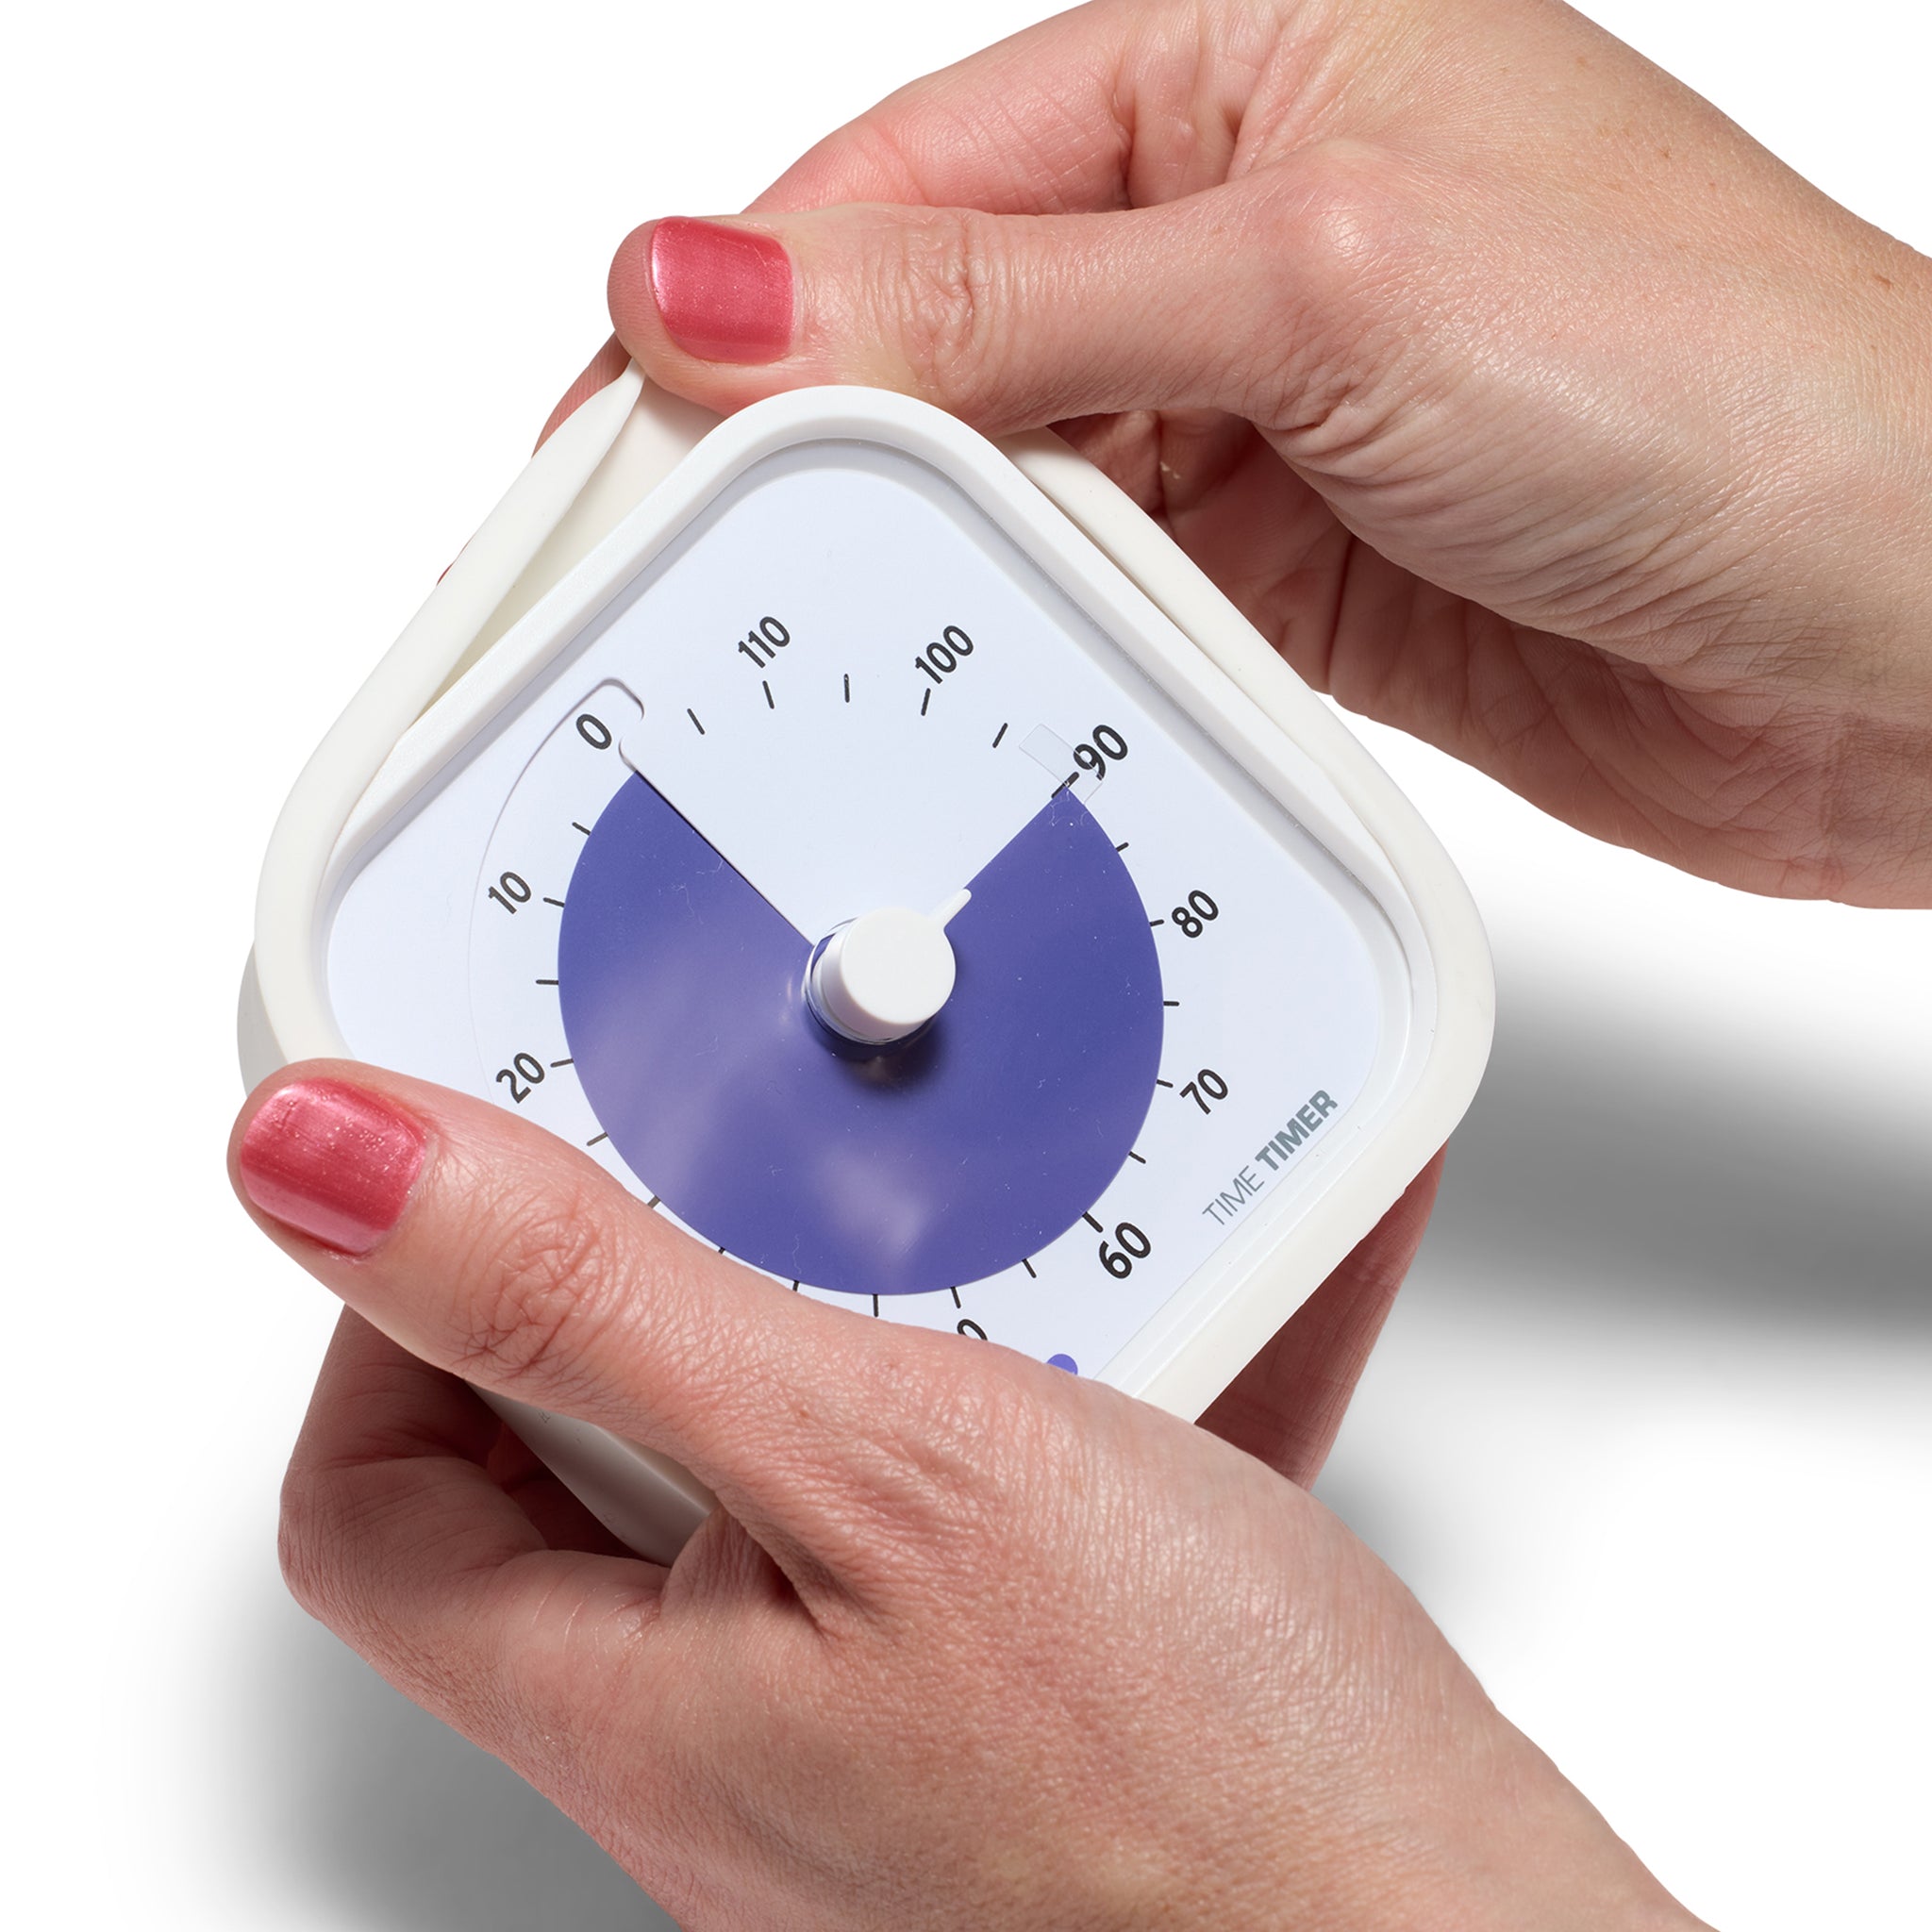 The Time Timer MOD 120 Minute Education Edition timer is being held by two hands. With one hand, the white silicone case is being peeled off of the timer. 